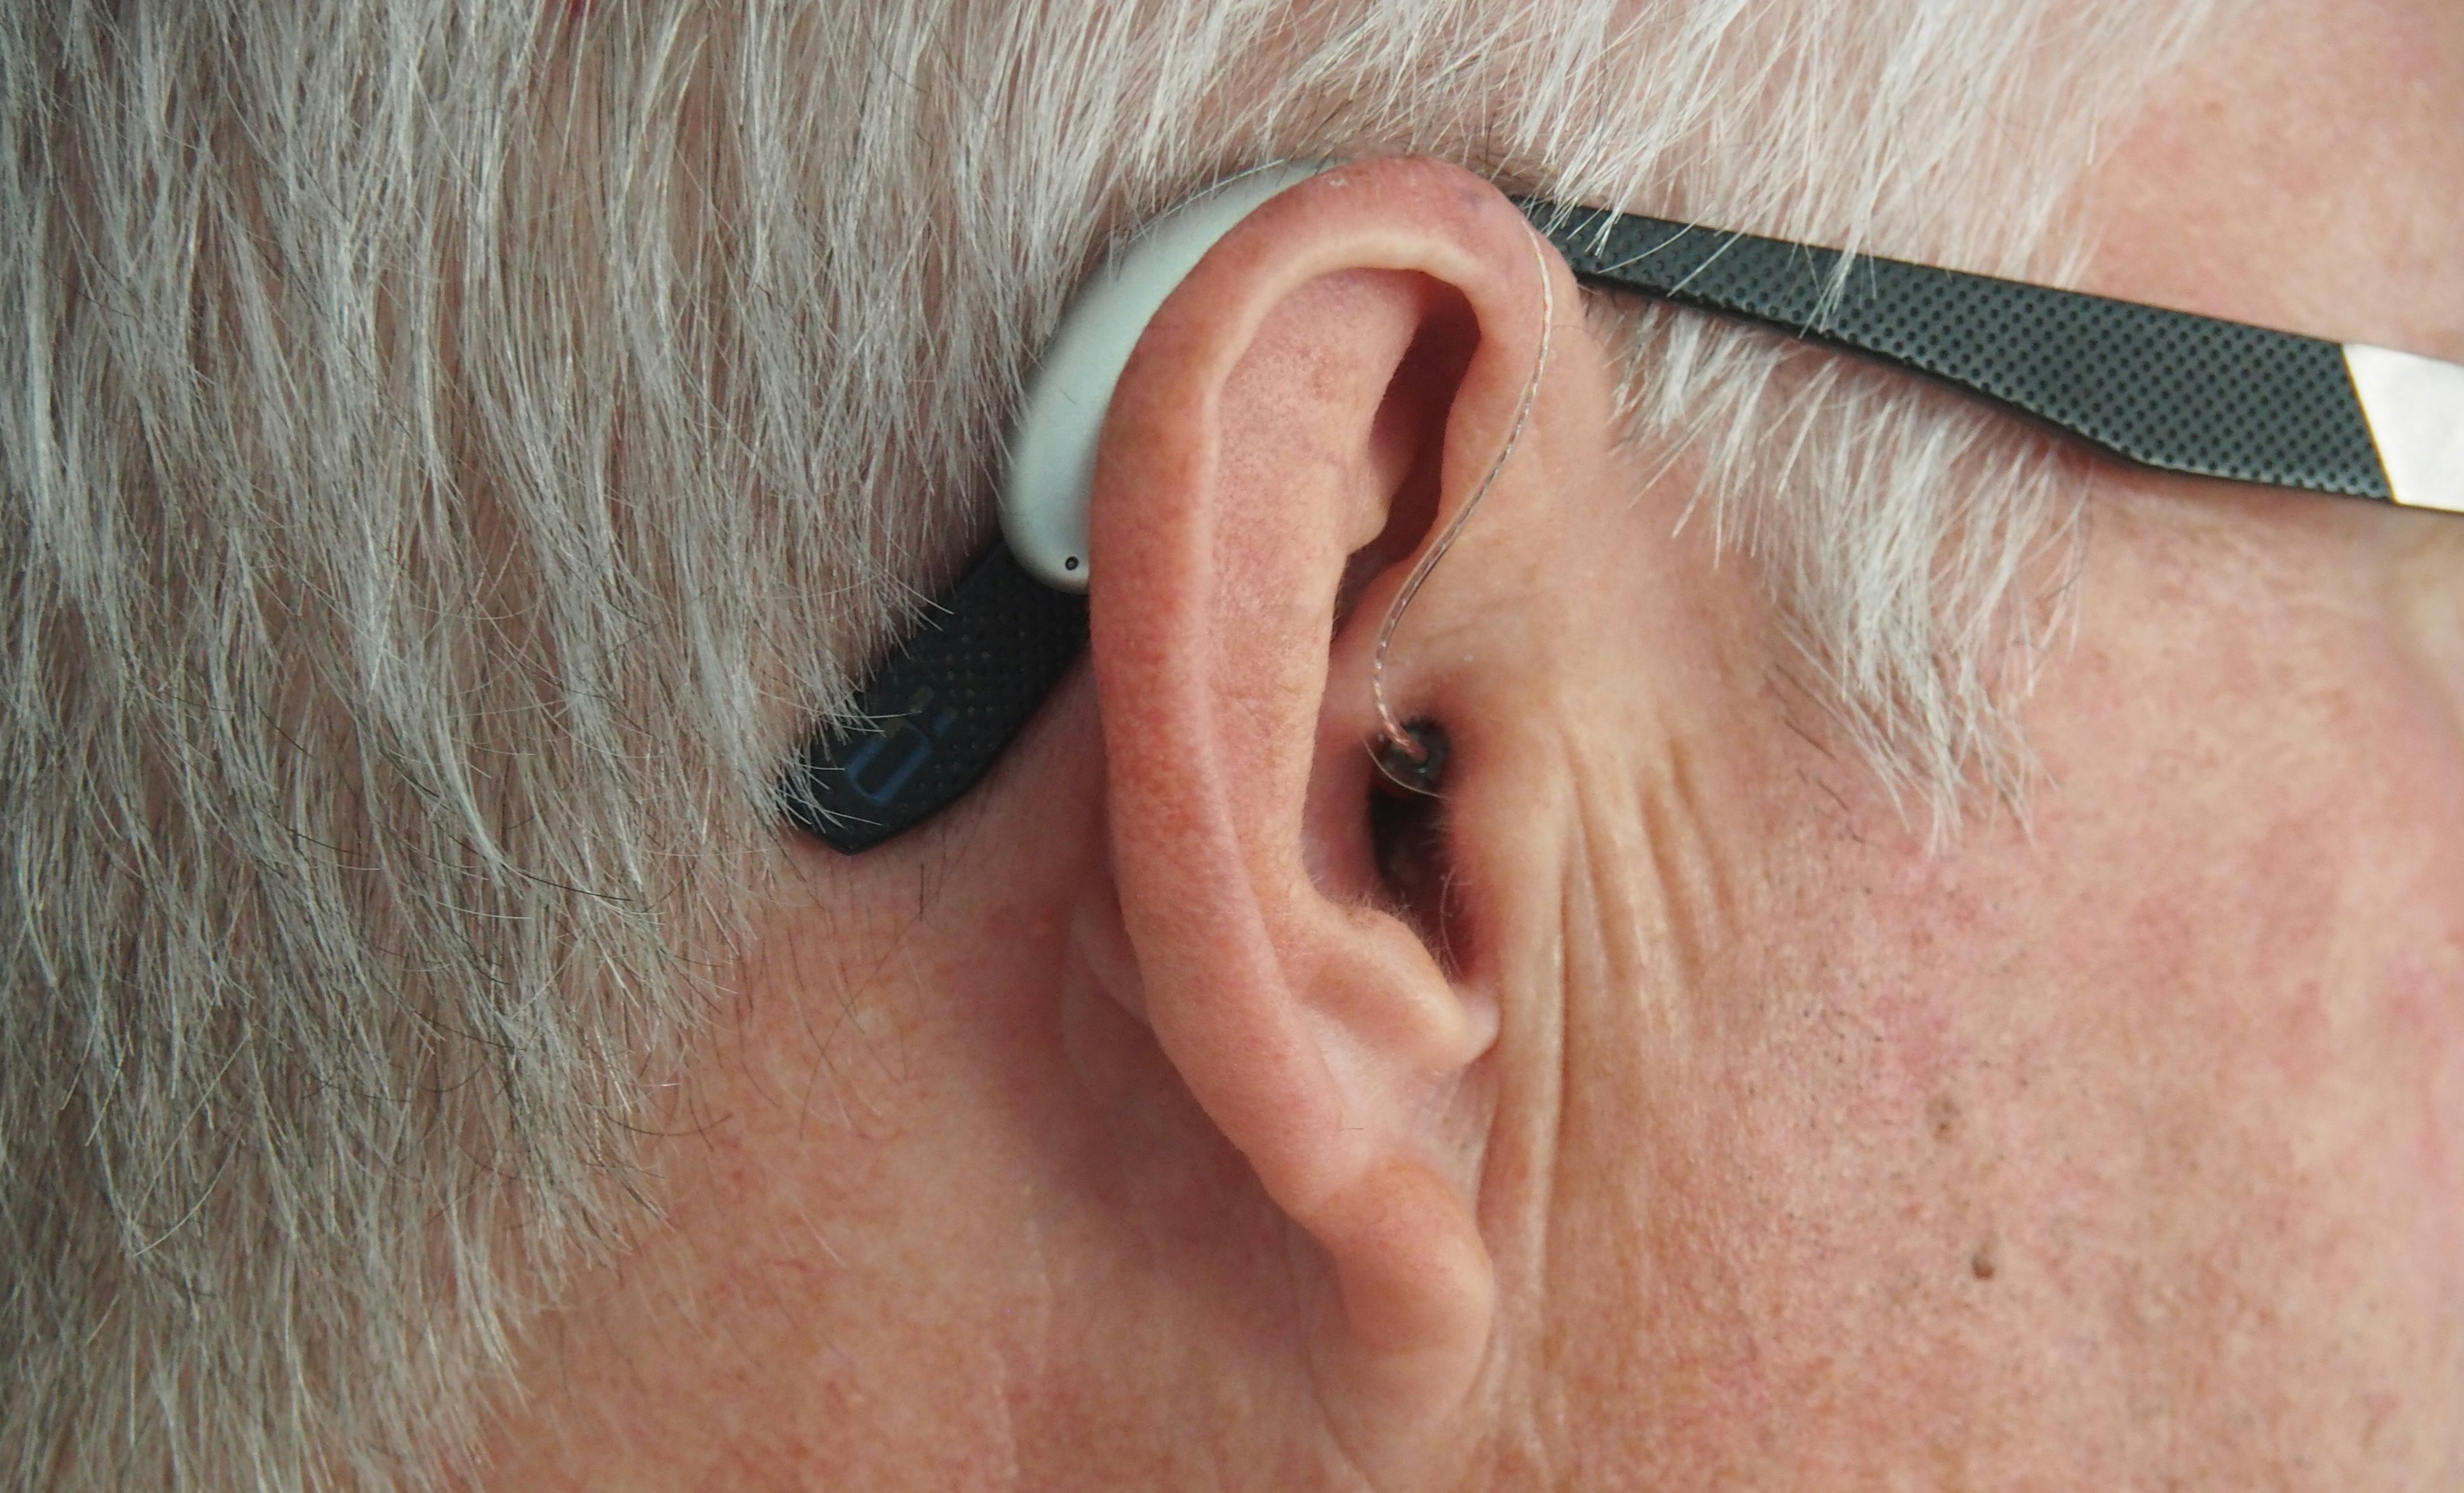 close up of ear of a person wearing a hearing aid